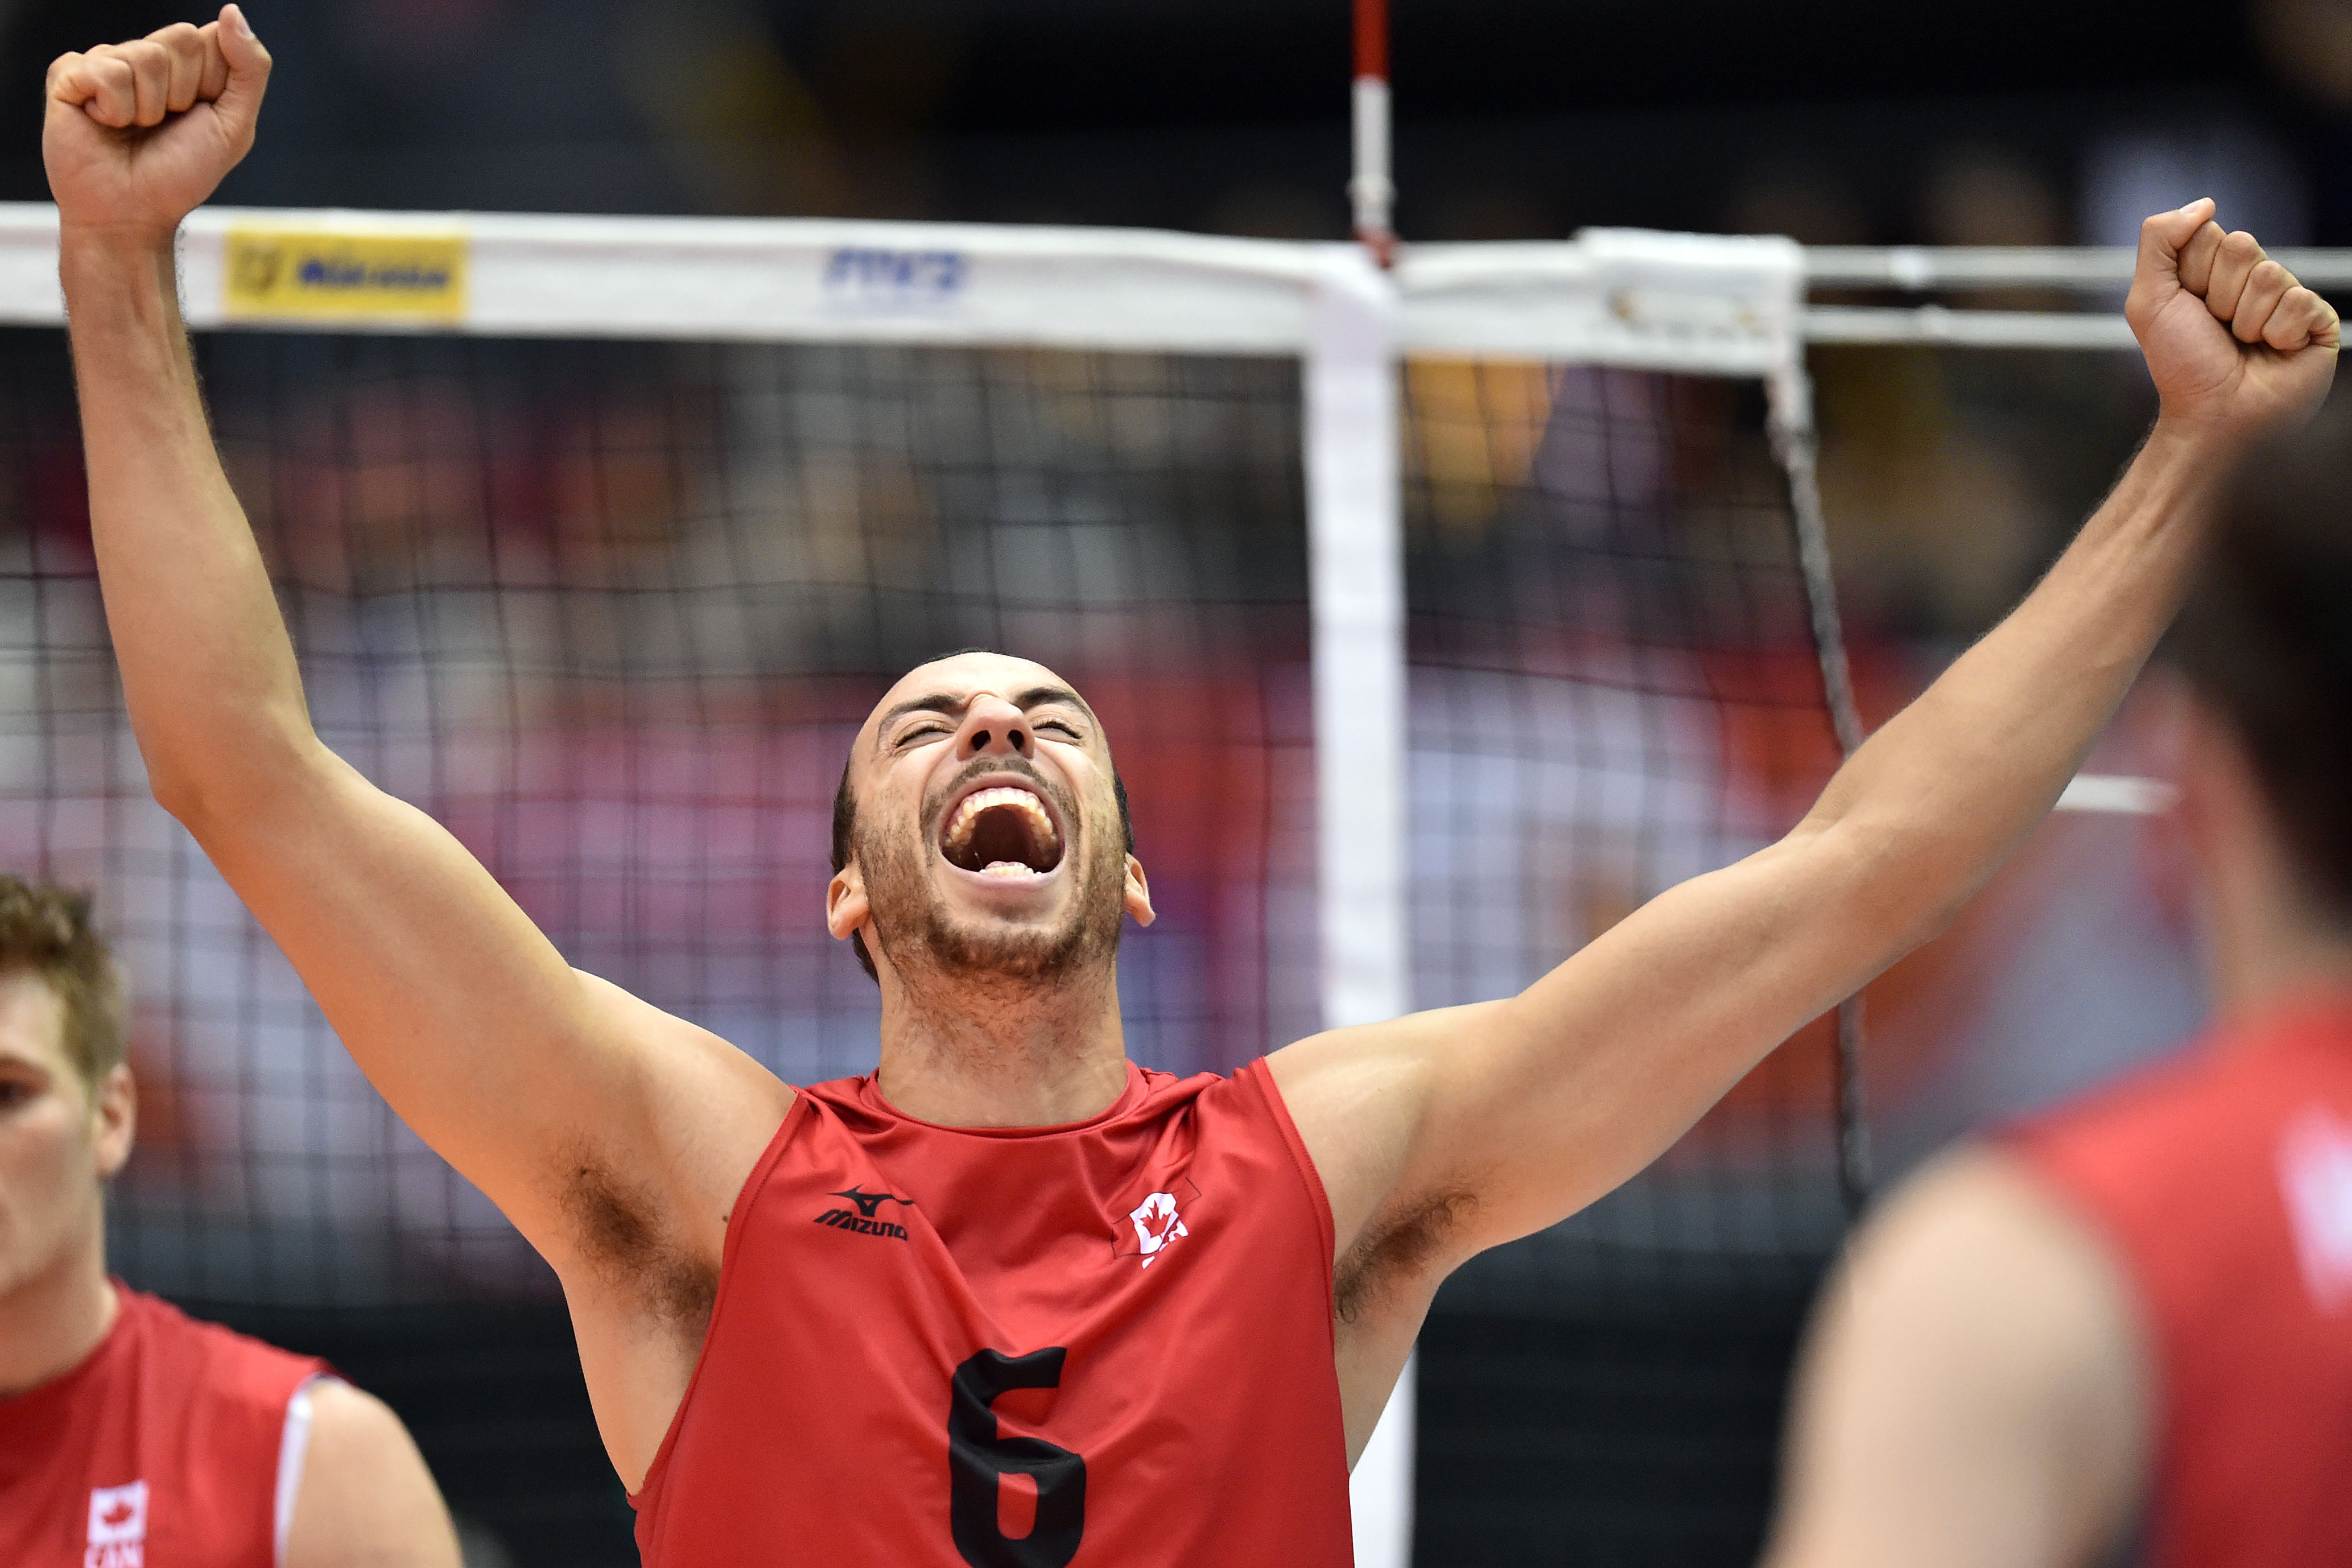 Rudy Verhoff celebrates against Australia at the World Cup on September 13, 2015 (Photo: FIVB). 